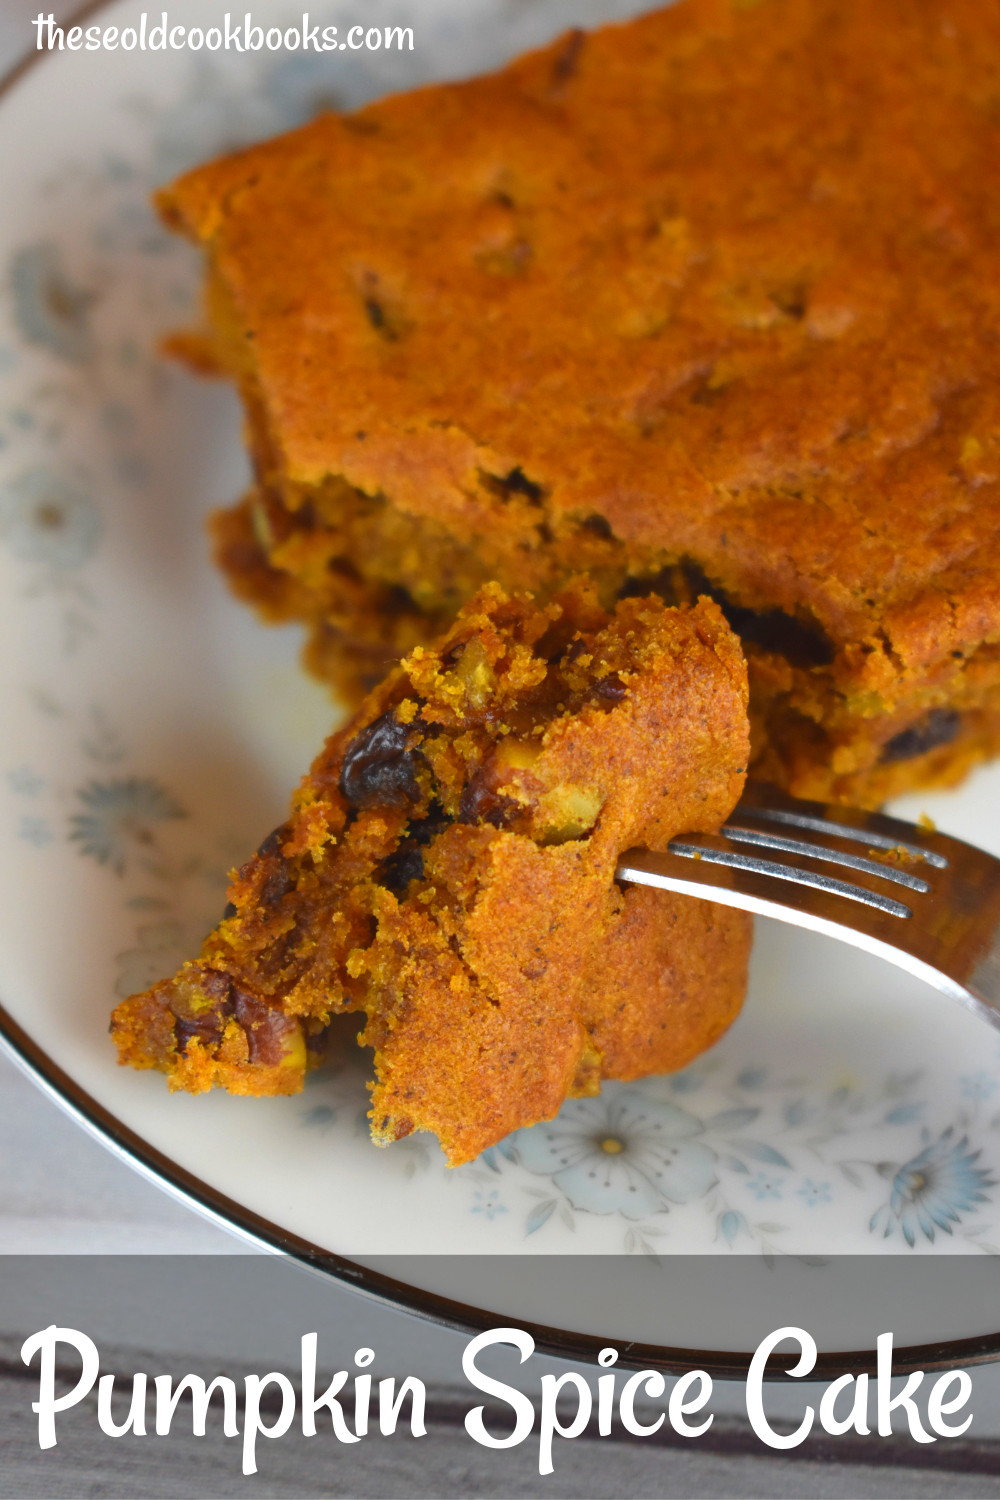 Vintage Spiced Pumpkin Cake is a simple recipe to follow that is big on flavor---featuring cinnamon and ground cloves.  The addition of raisins gives this pumpkin spice cake a perfect moist texture.  Serve with coffee for breakfast or add a cream cheese icing for an easy dessert option.